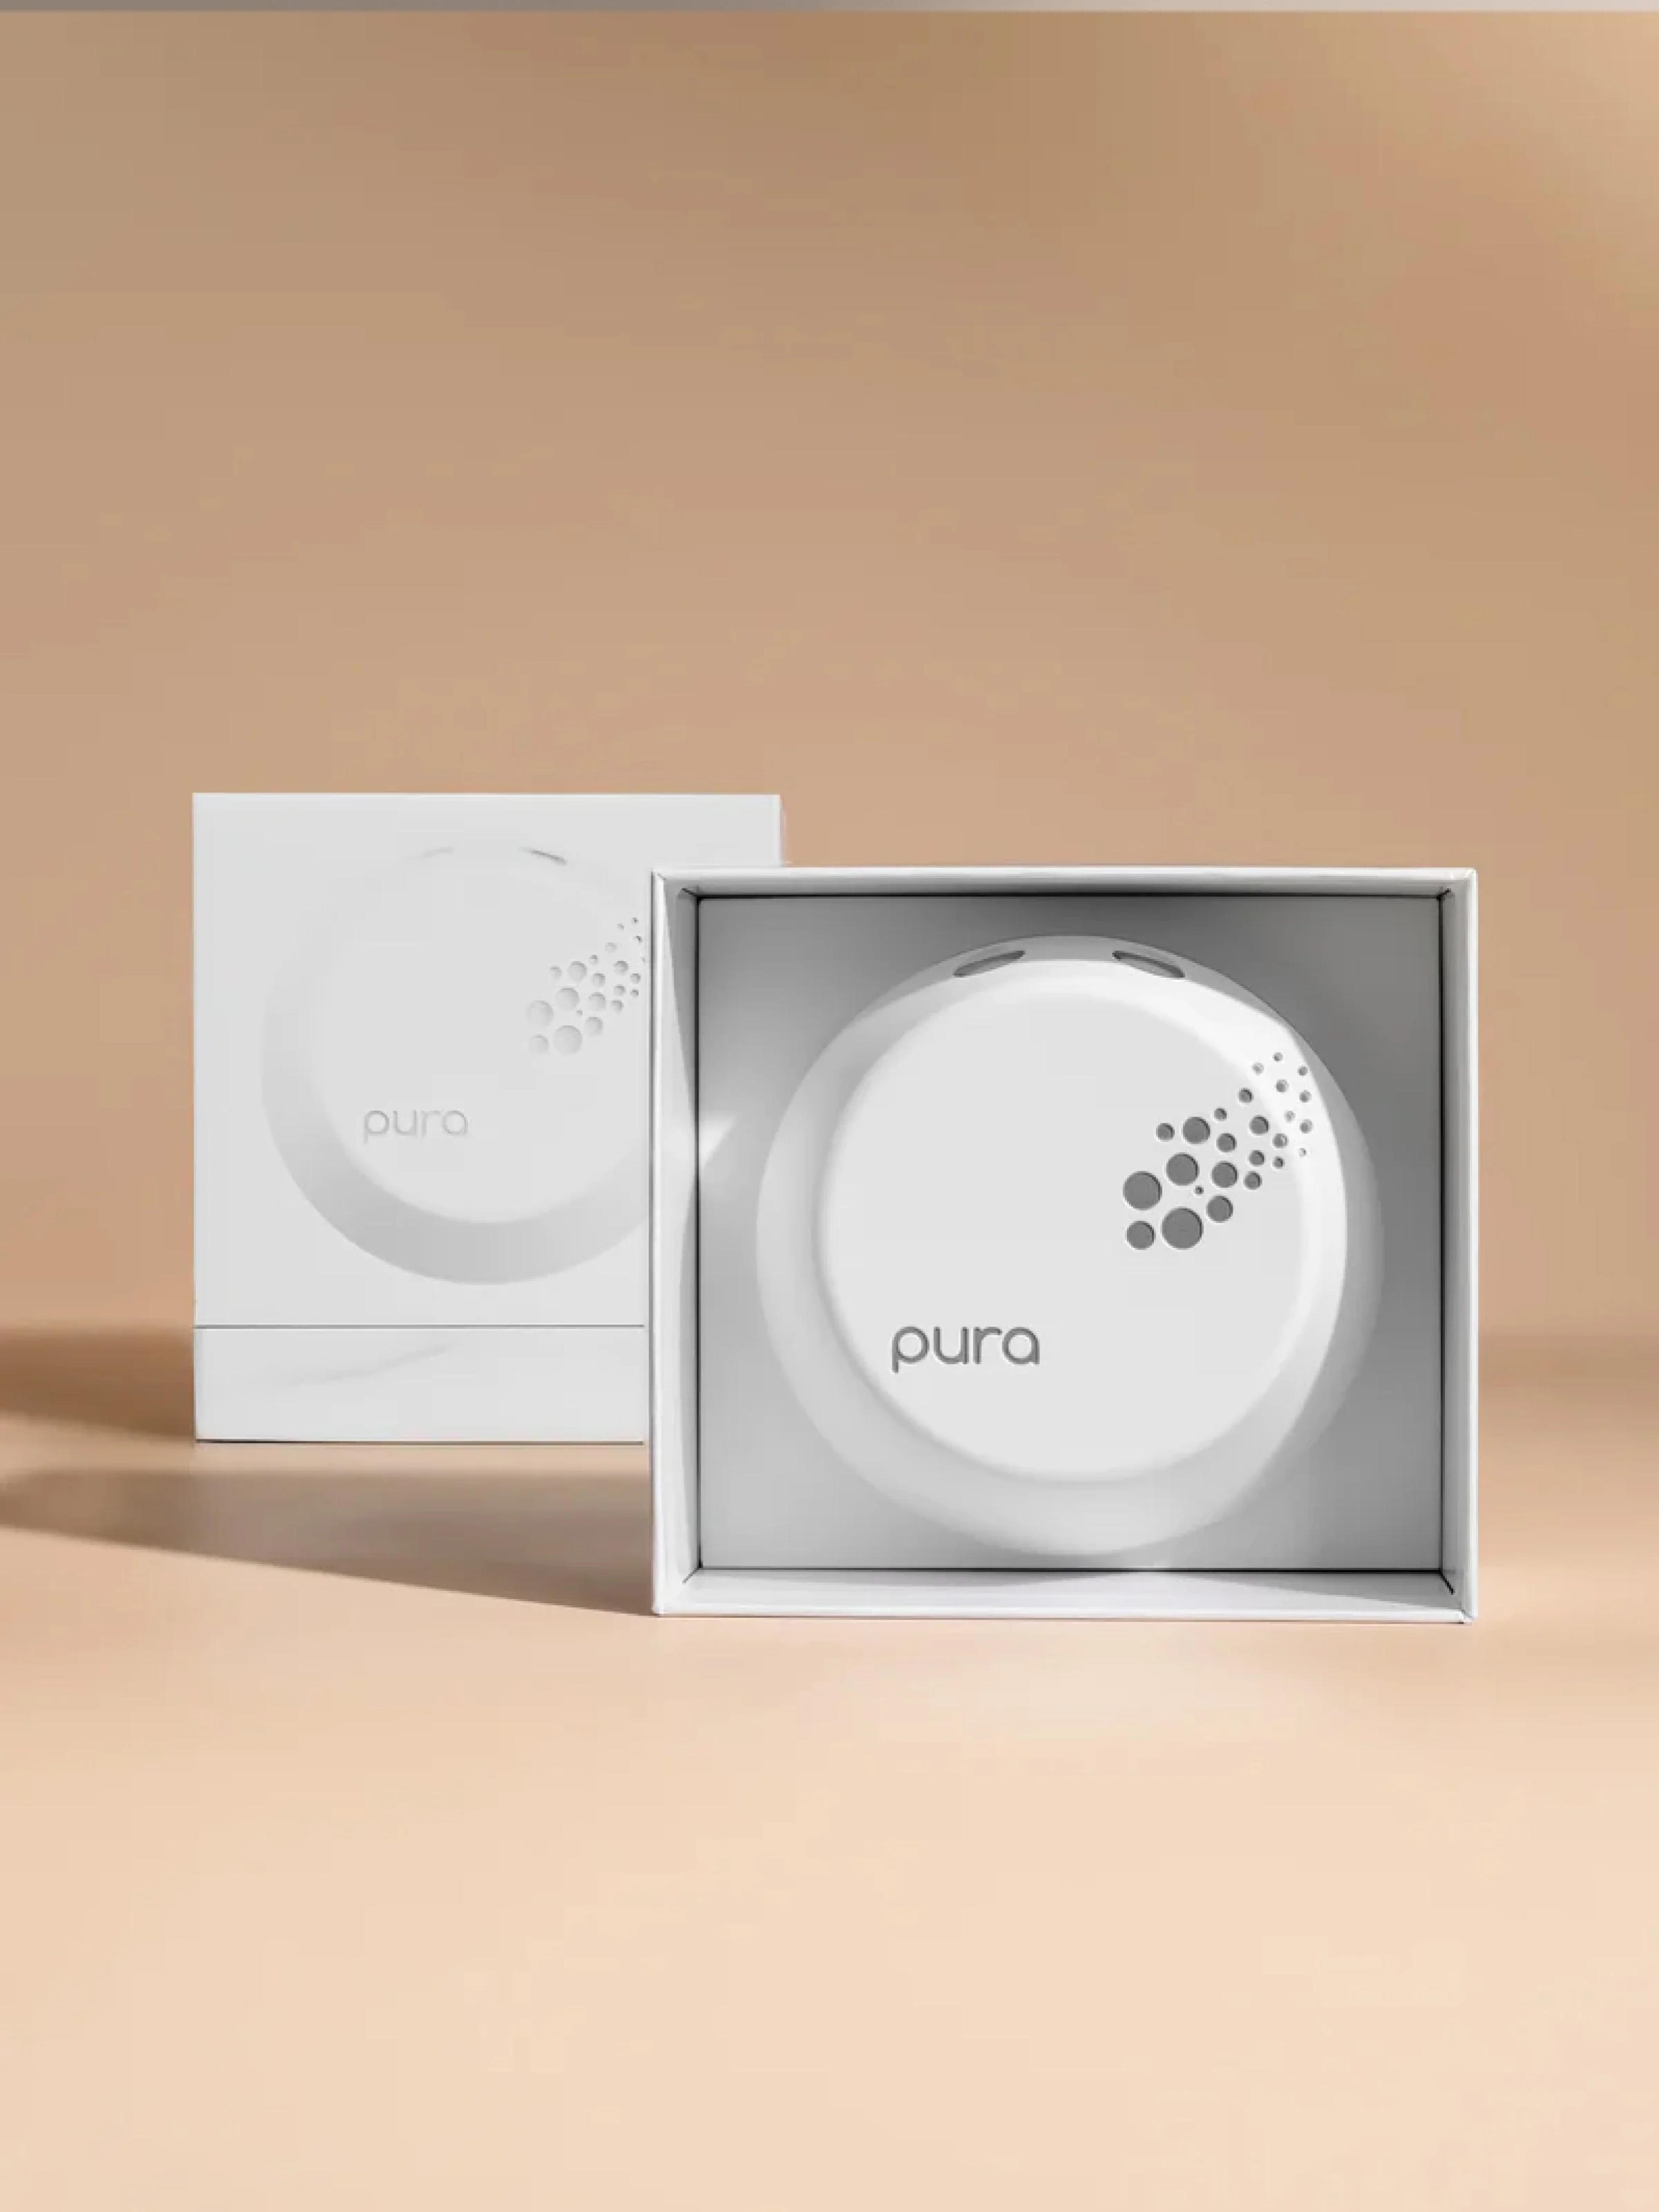 Diffuser for Home Fragrance - Pura